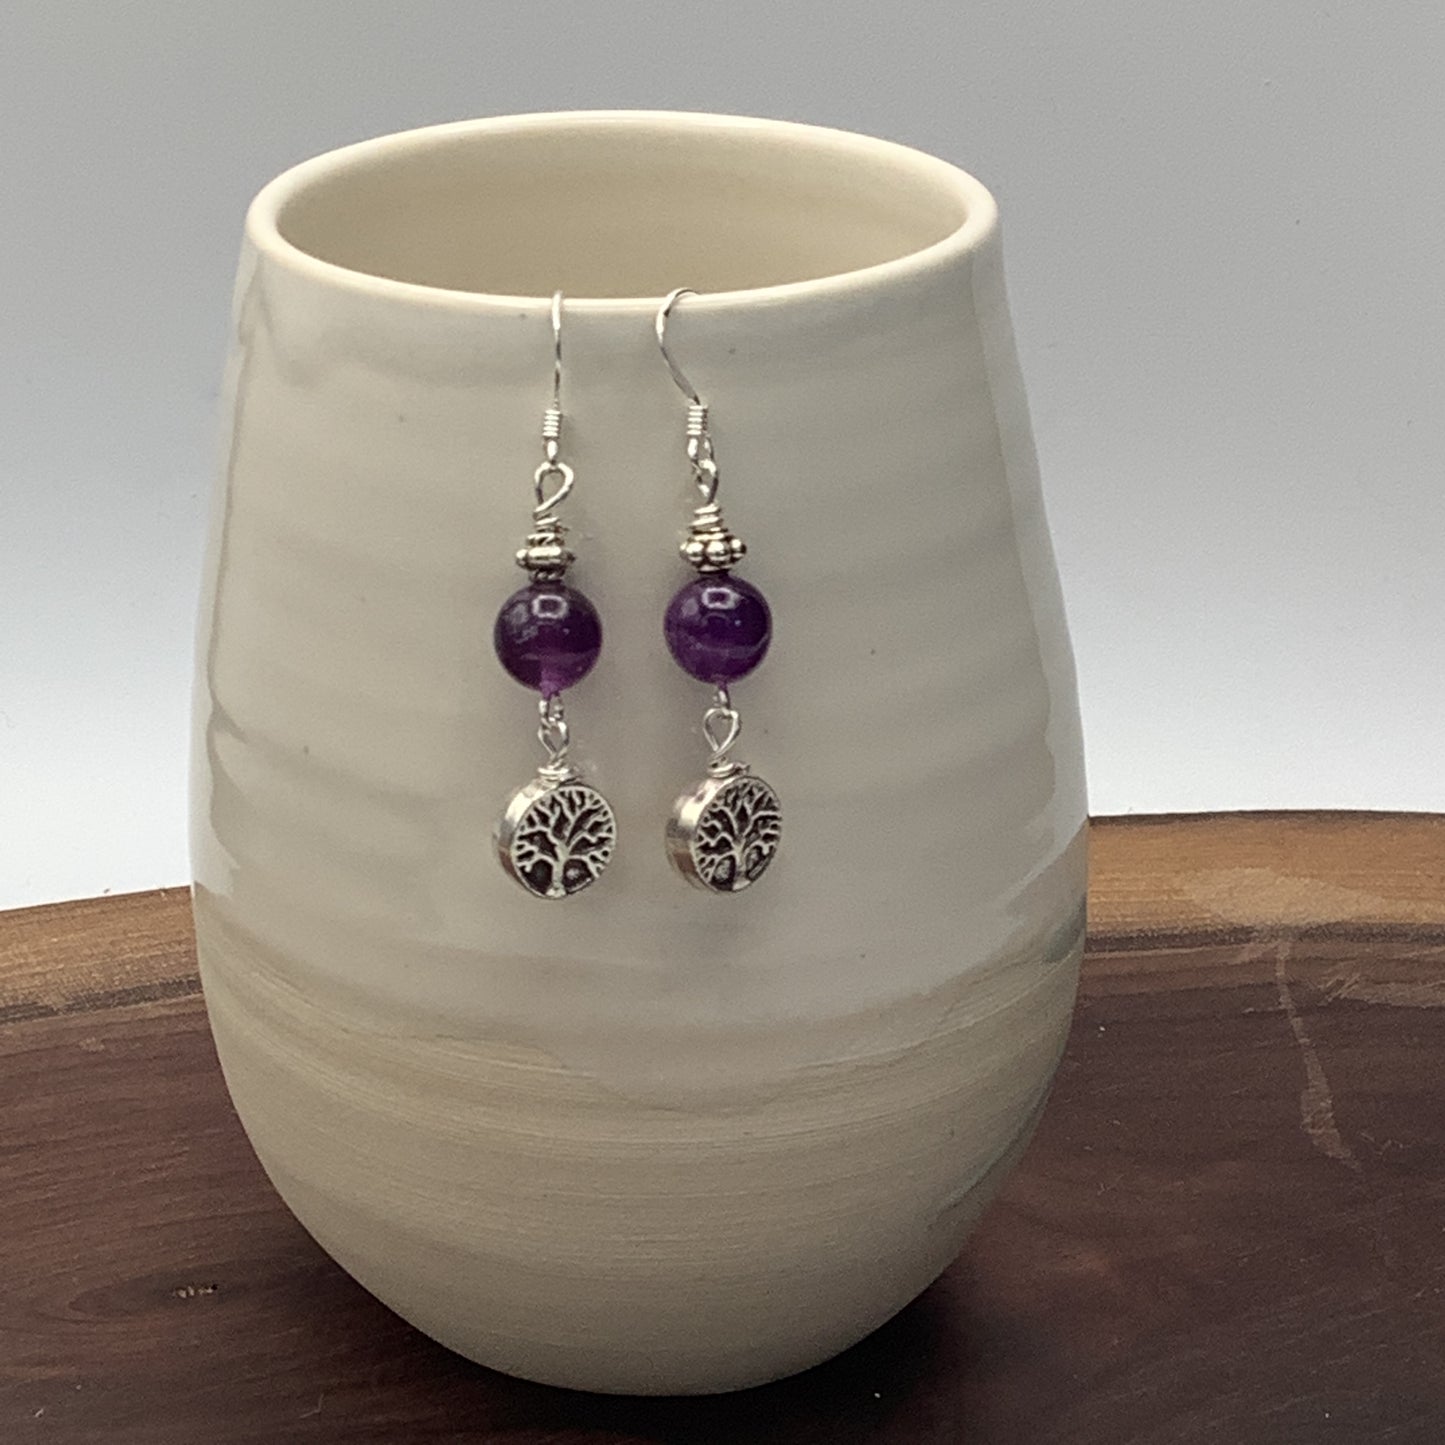 Amethyst earrings with Tree of Life